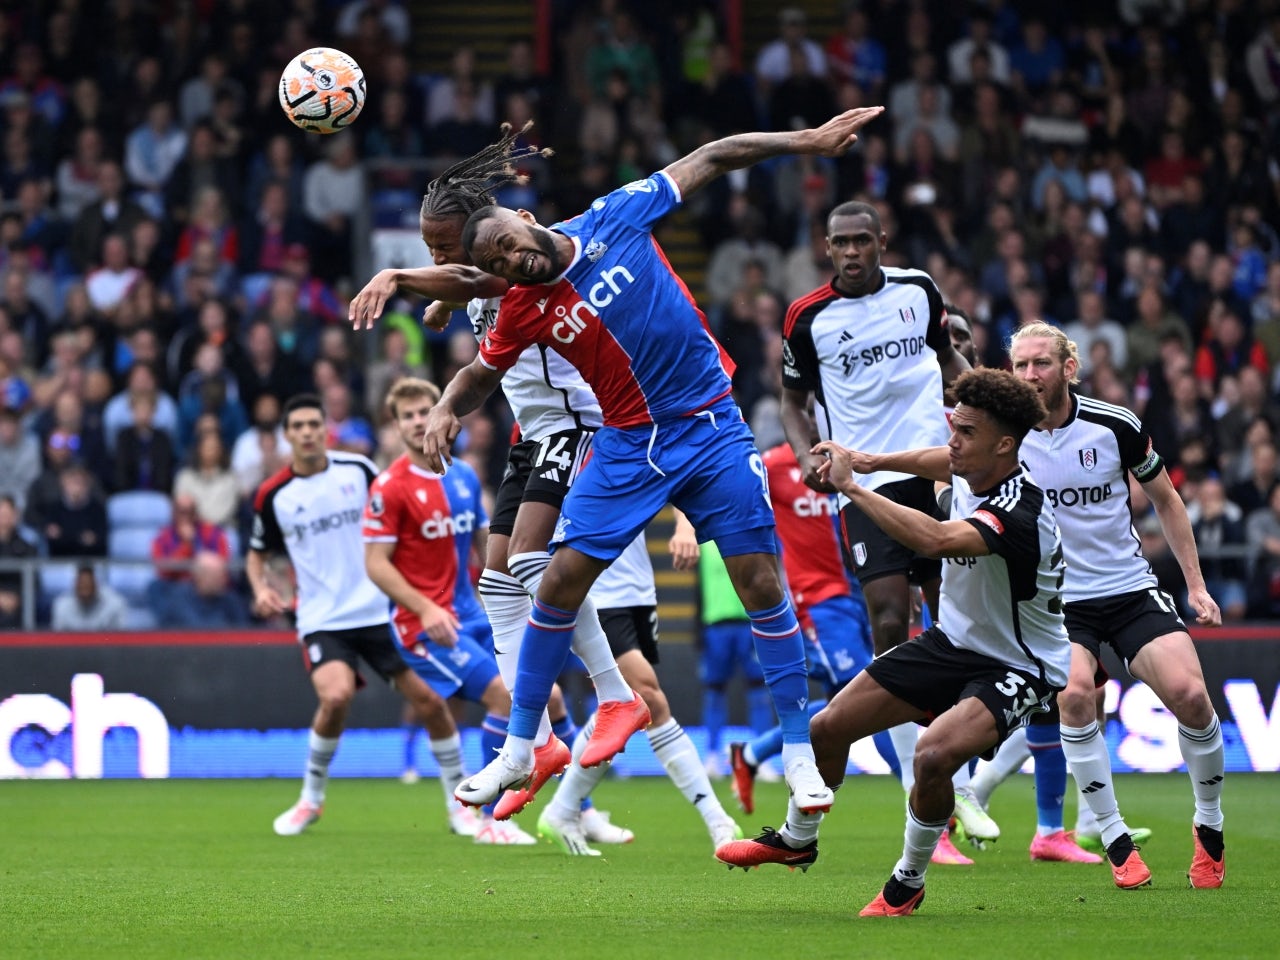 Crystal Palace, Fulham play out hard-fought draw at Selhurst Park